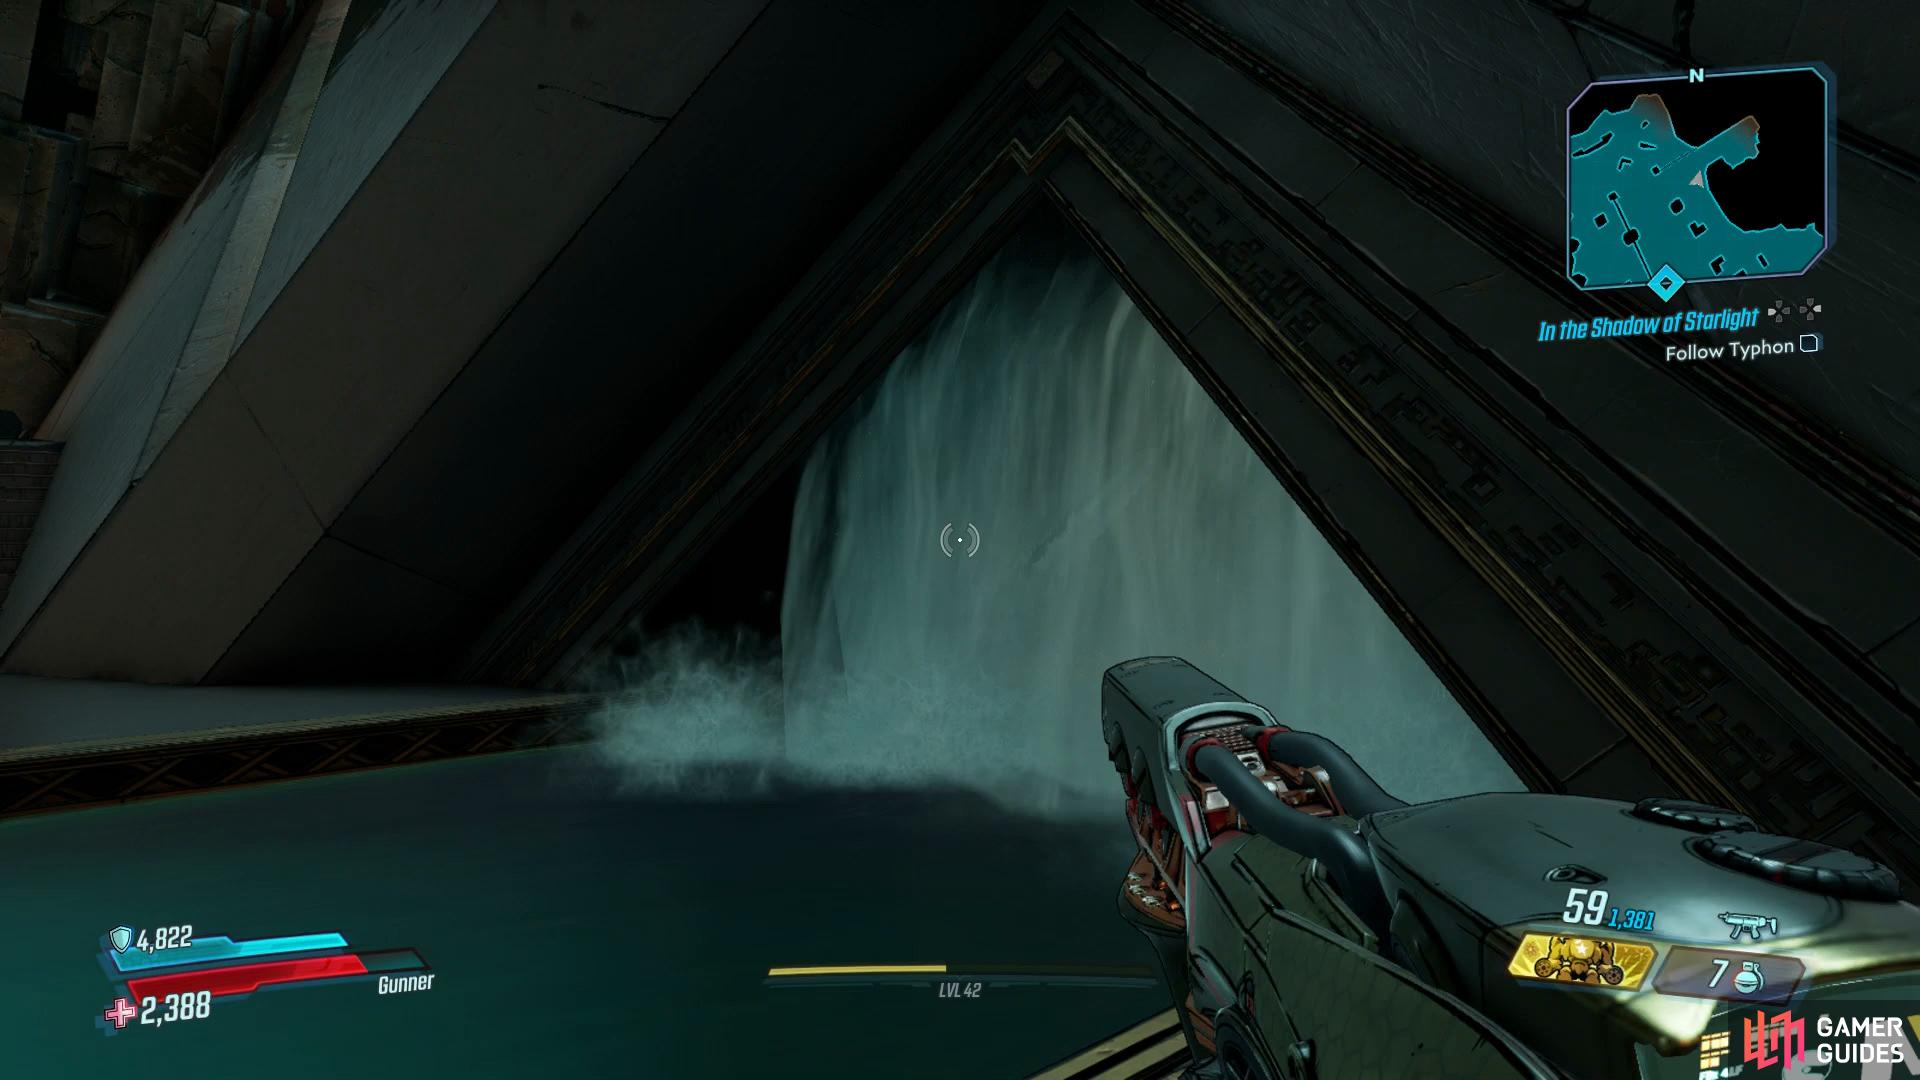 Search behind the waterfall in Wet Well to find the second Red Chest.